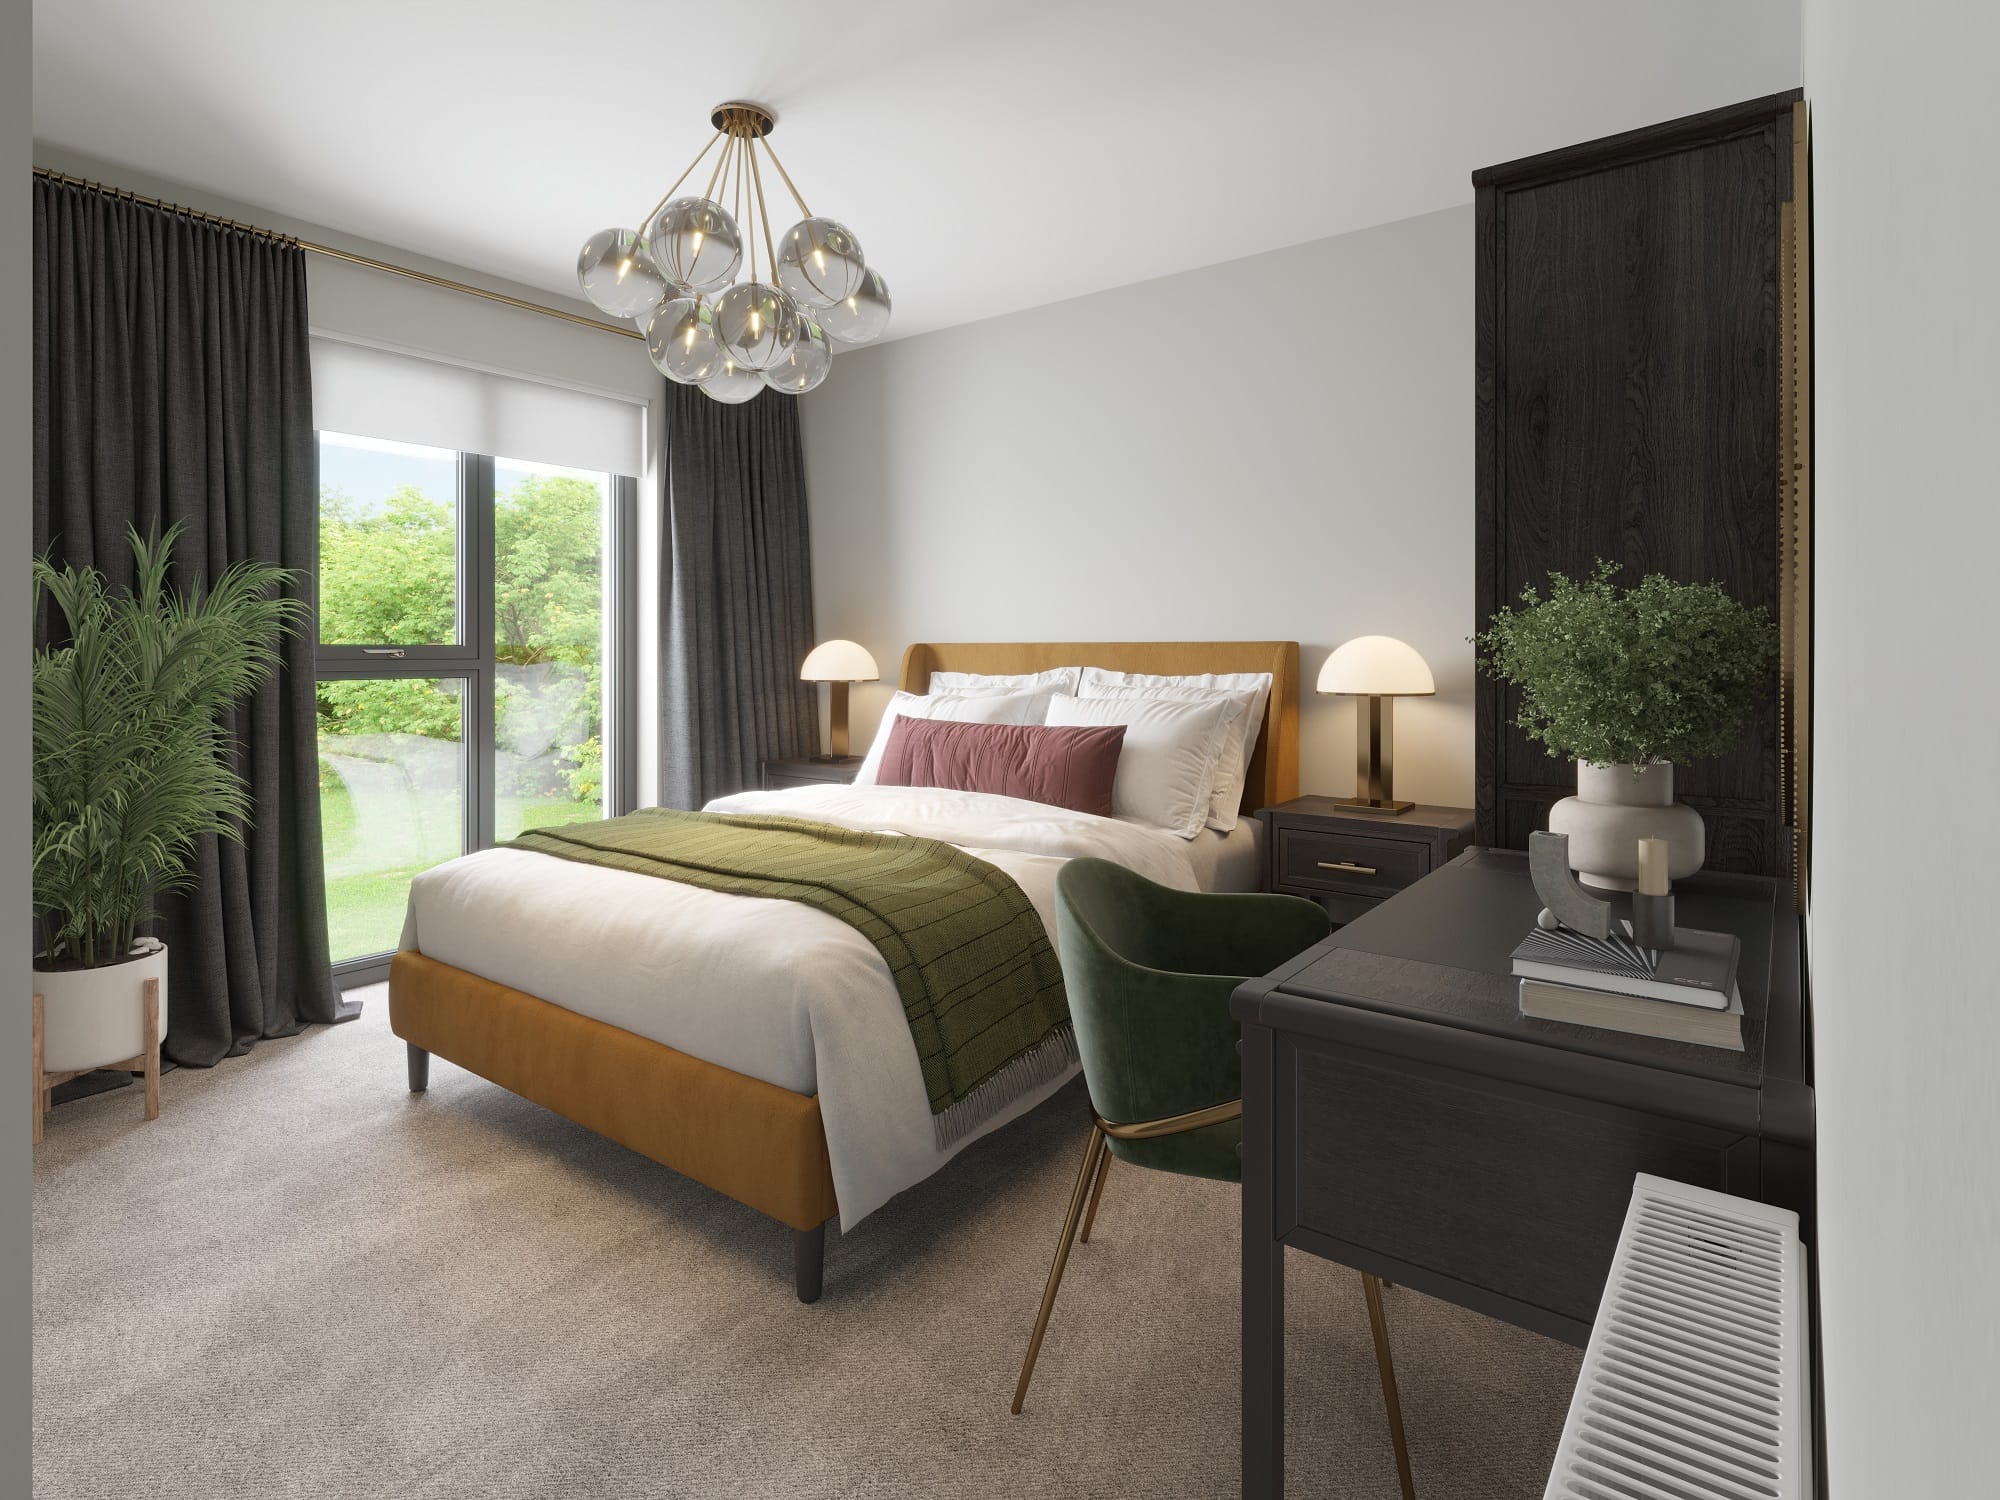 Image of Kings Hill development from Moat Homes - available to purchase through Shared Ownership on Share to Buy!